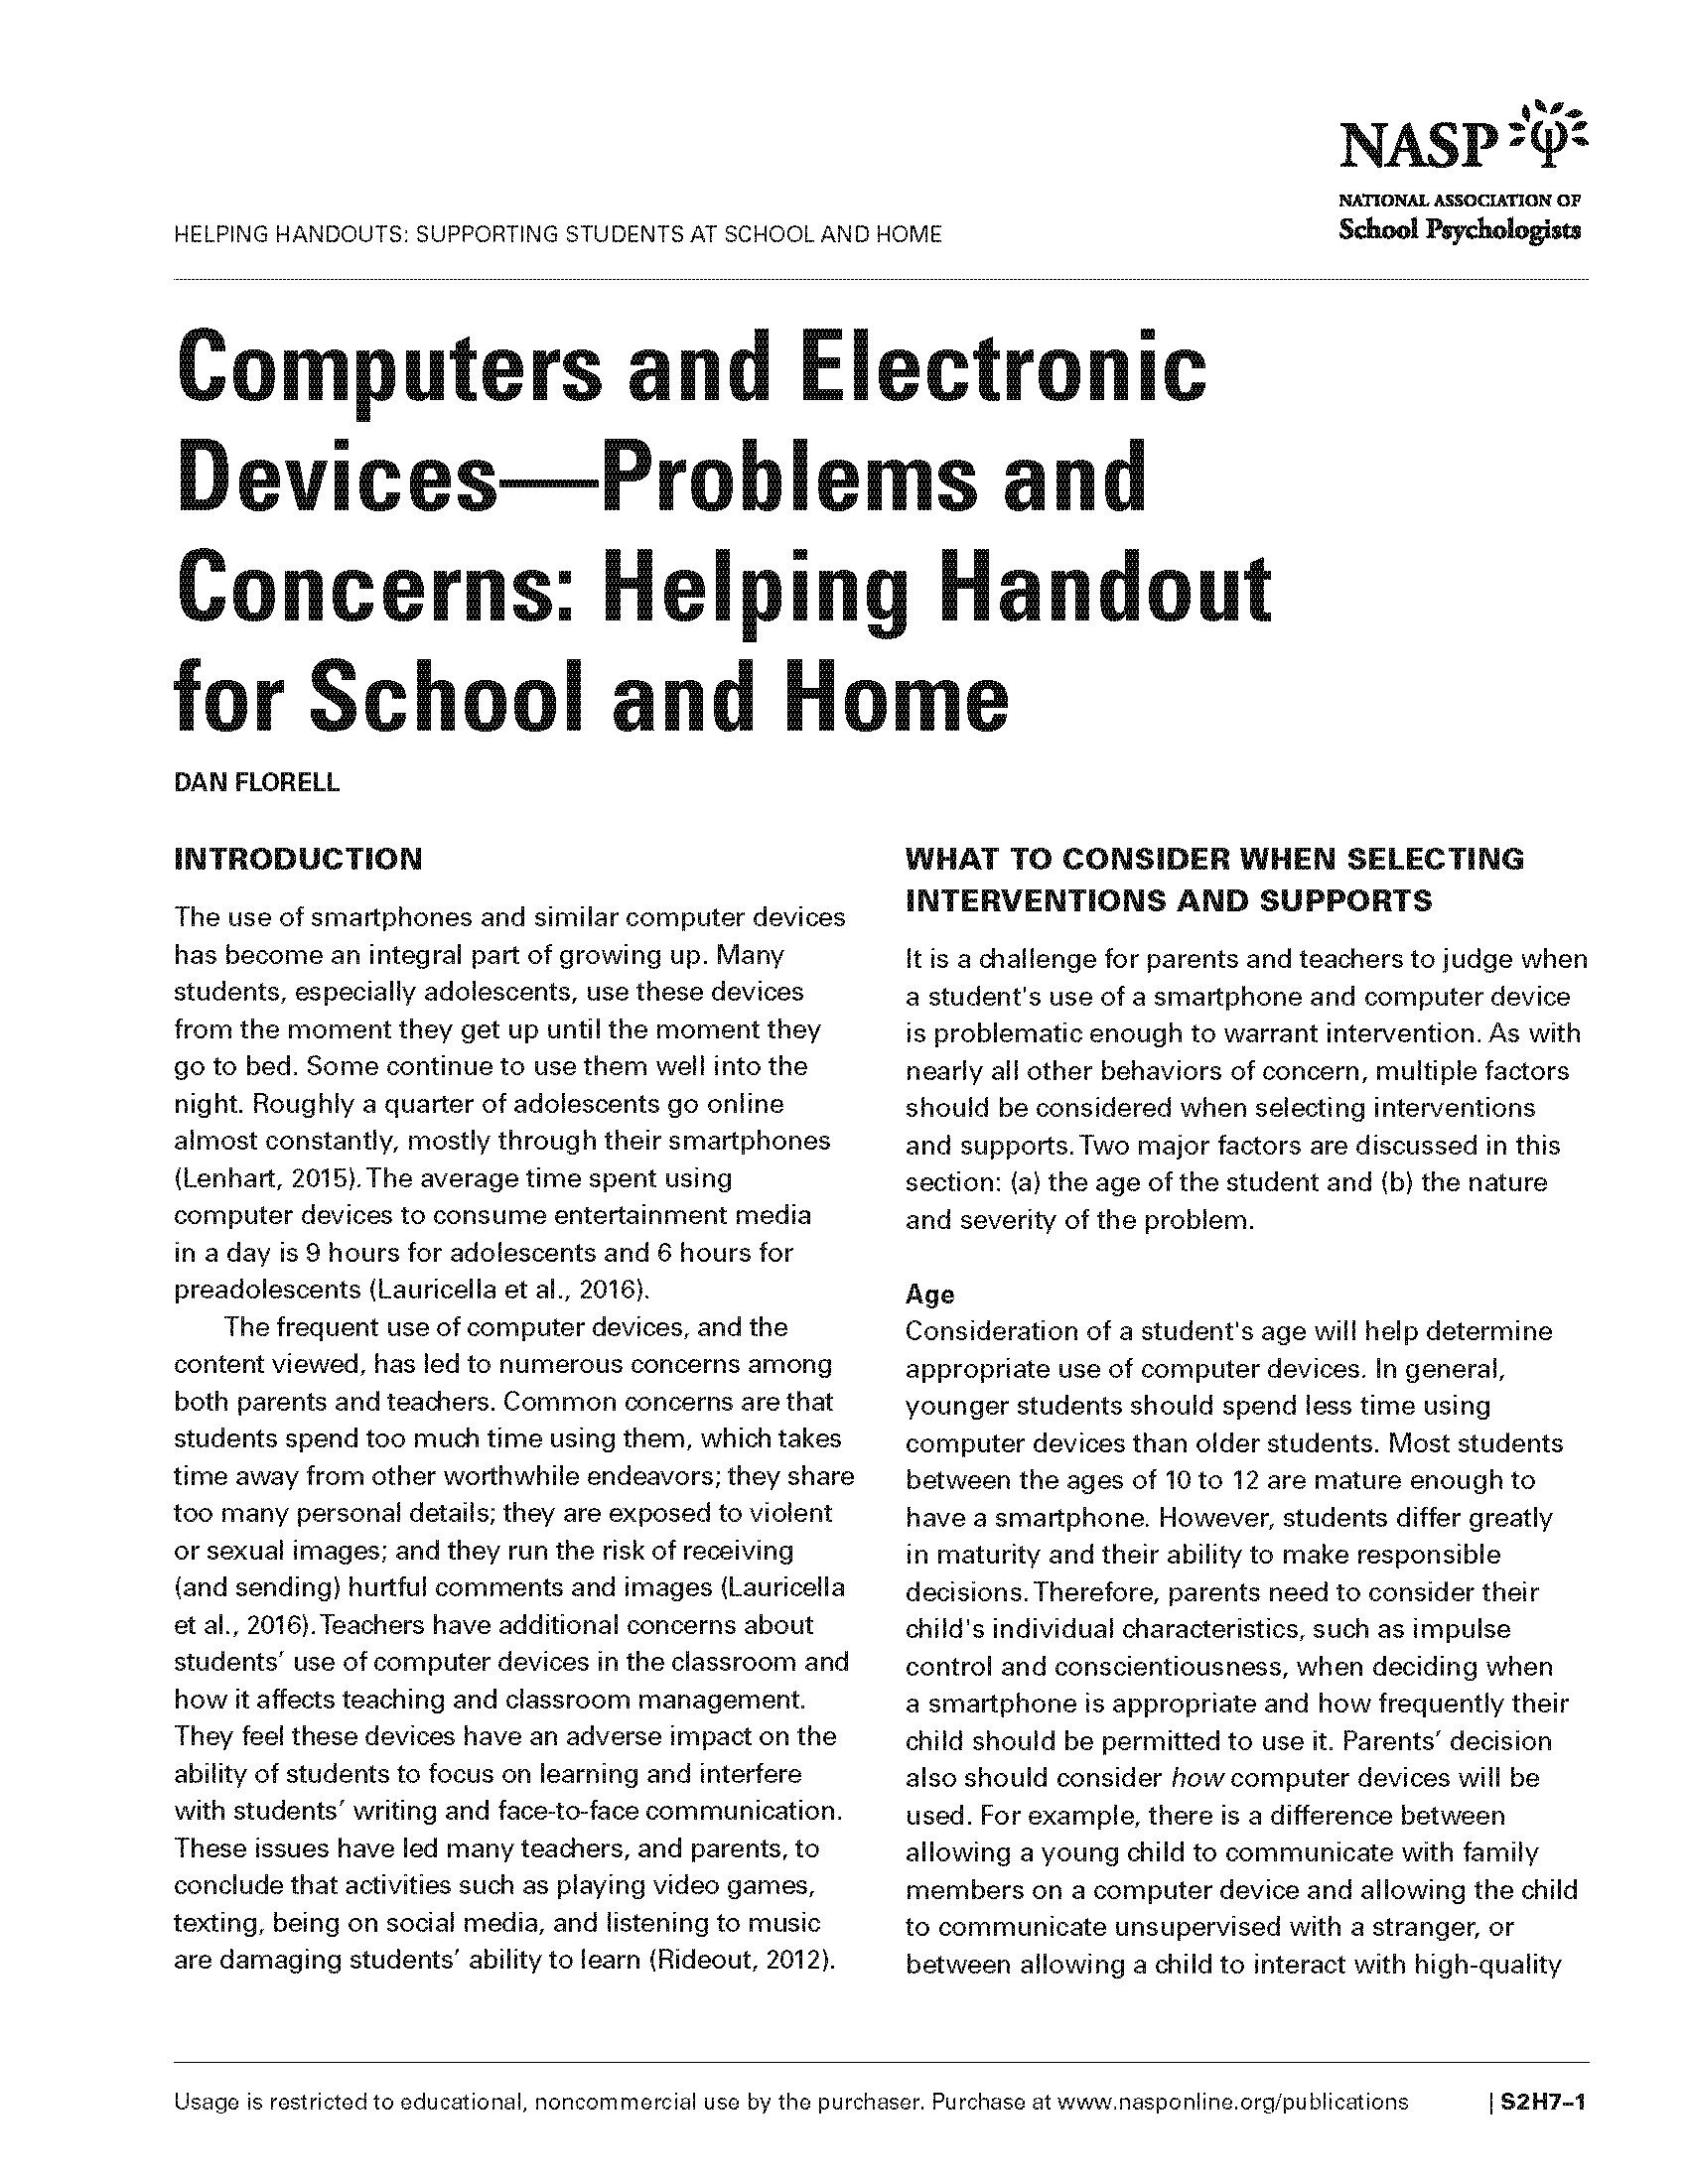 Computers and Electronic Devices—Problems and Concerns: Helping Handout for School and Home 